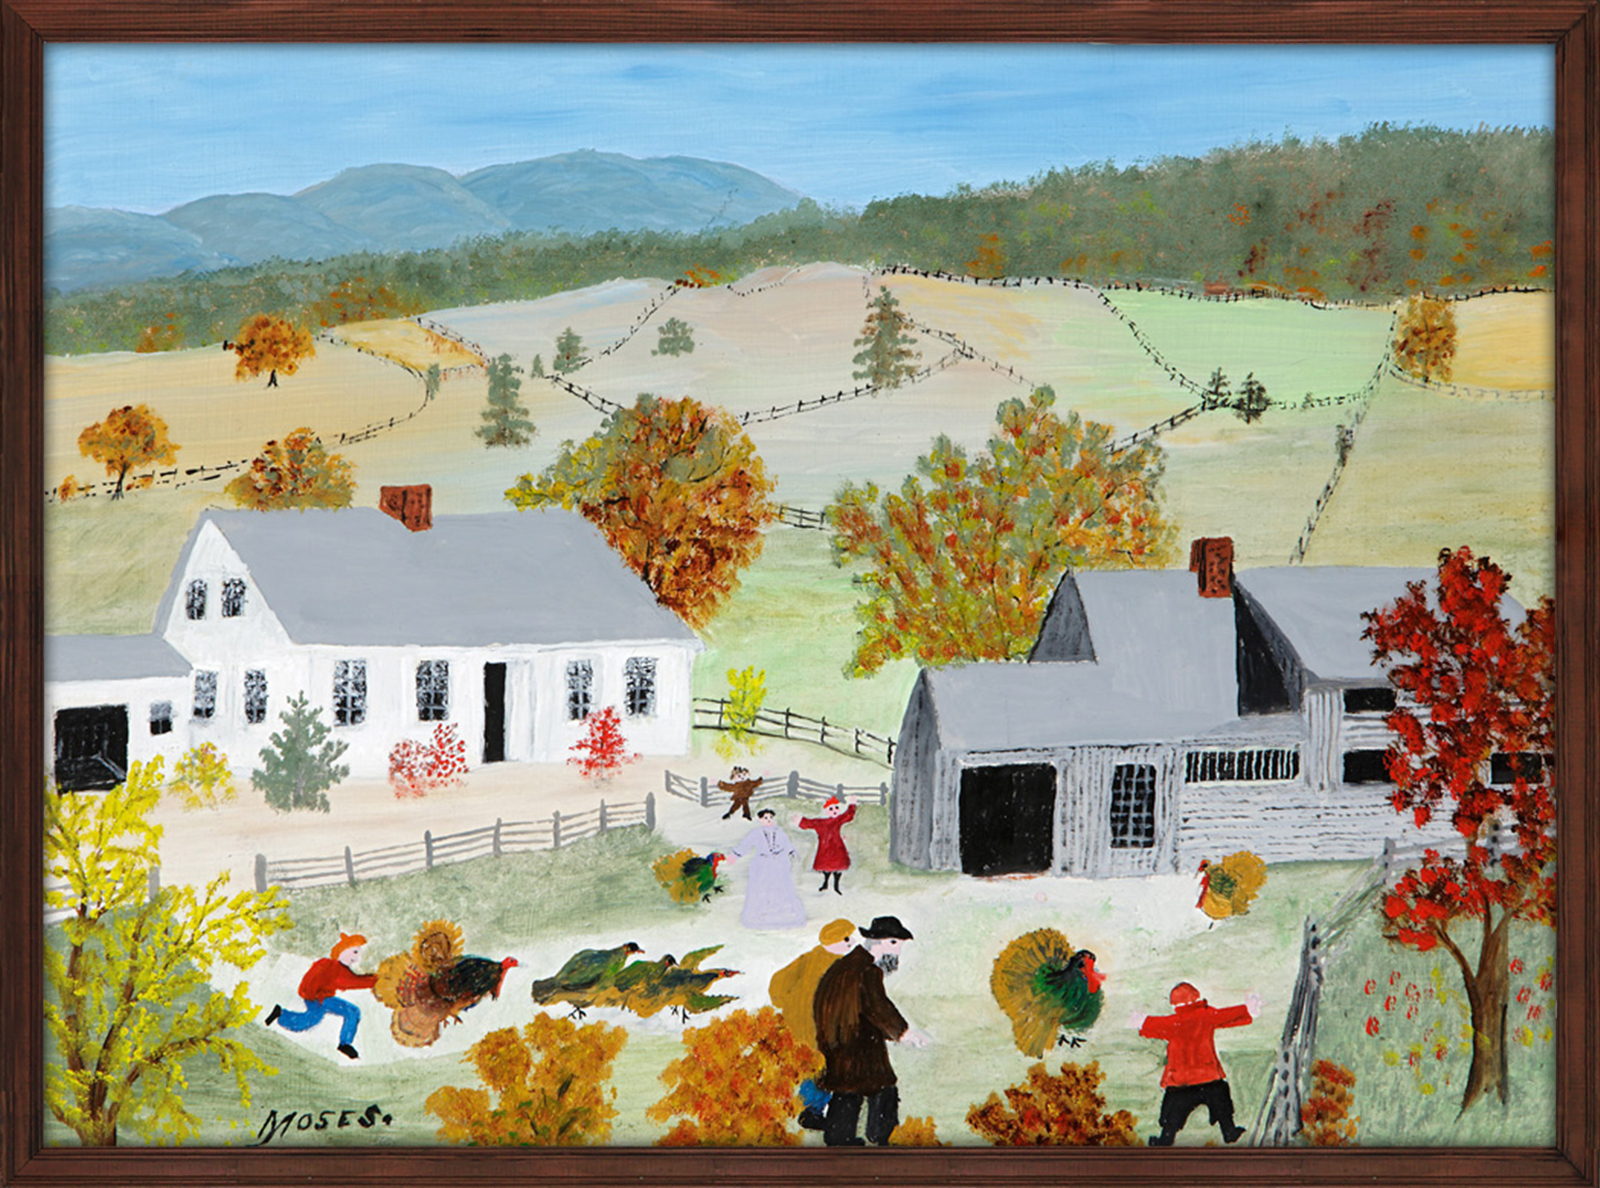 Grandma Moses painting of a farm with people chasing turkeys